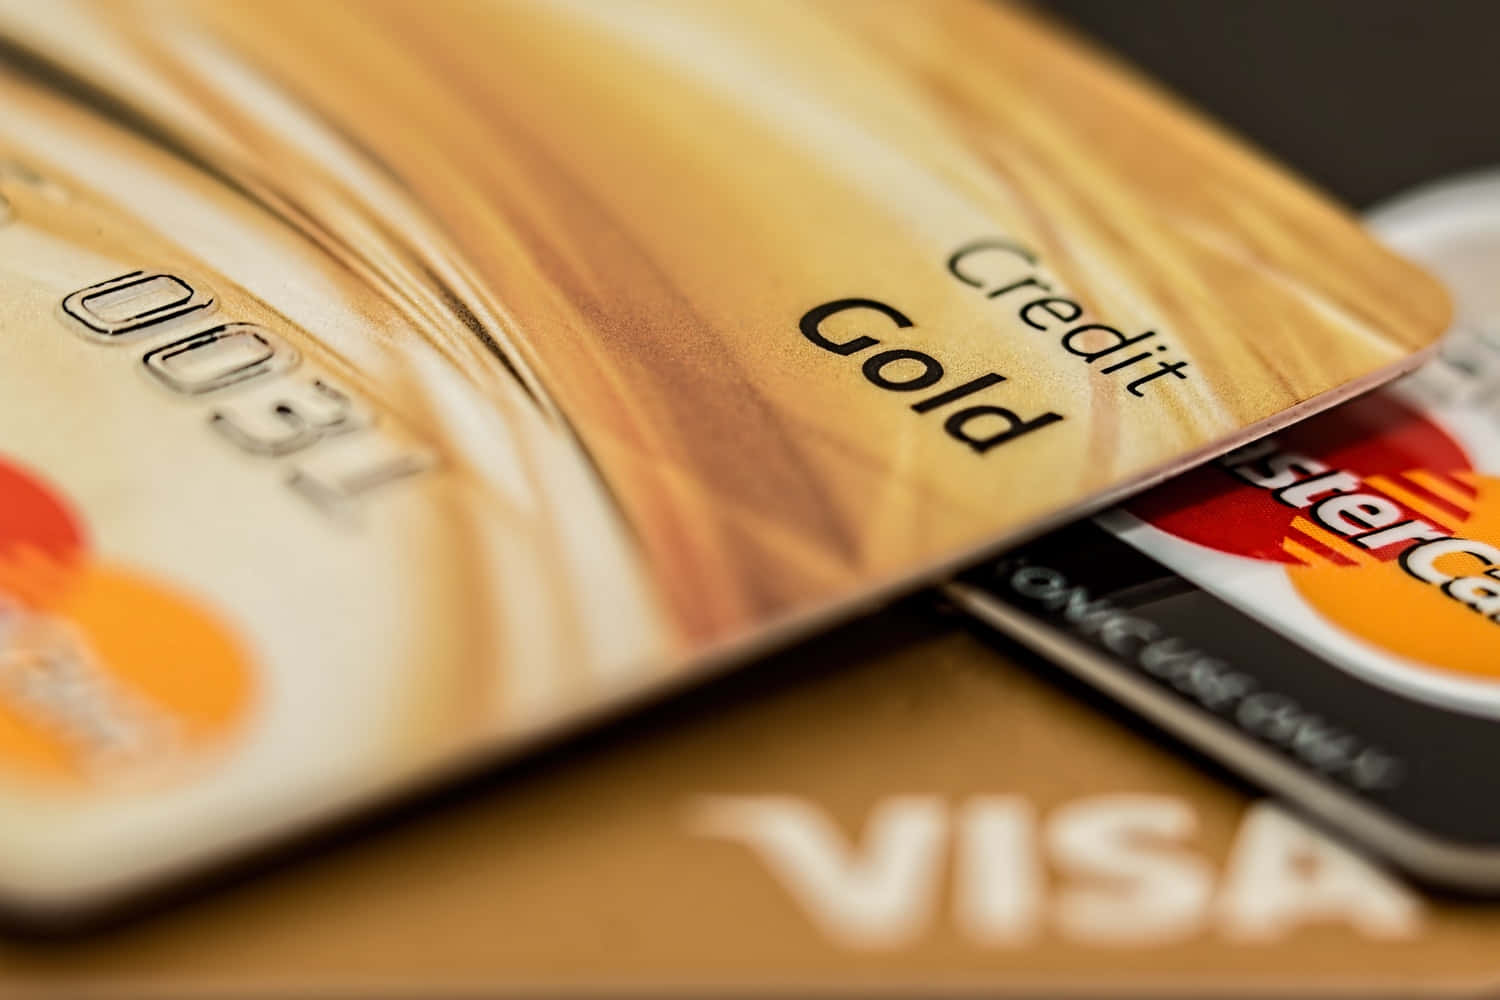 Credit Cards With Gold And Gold Logos